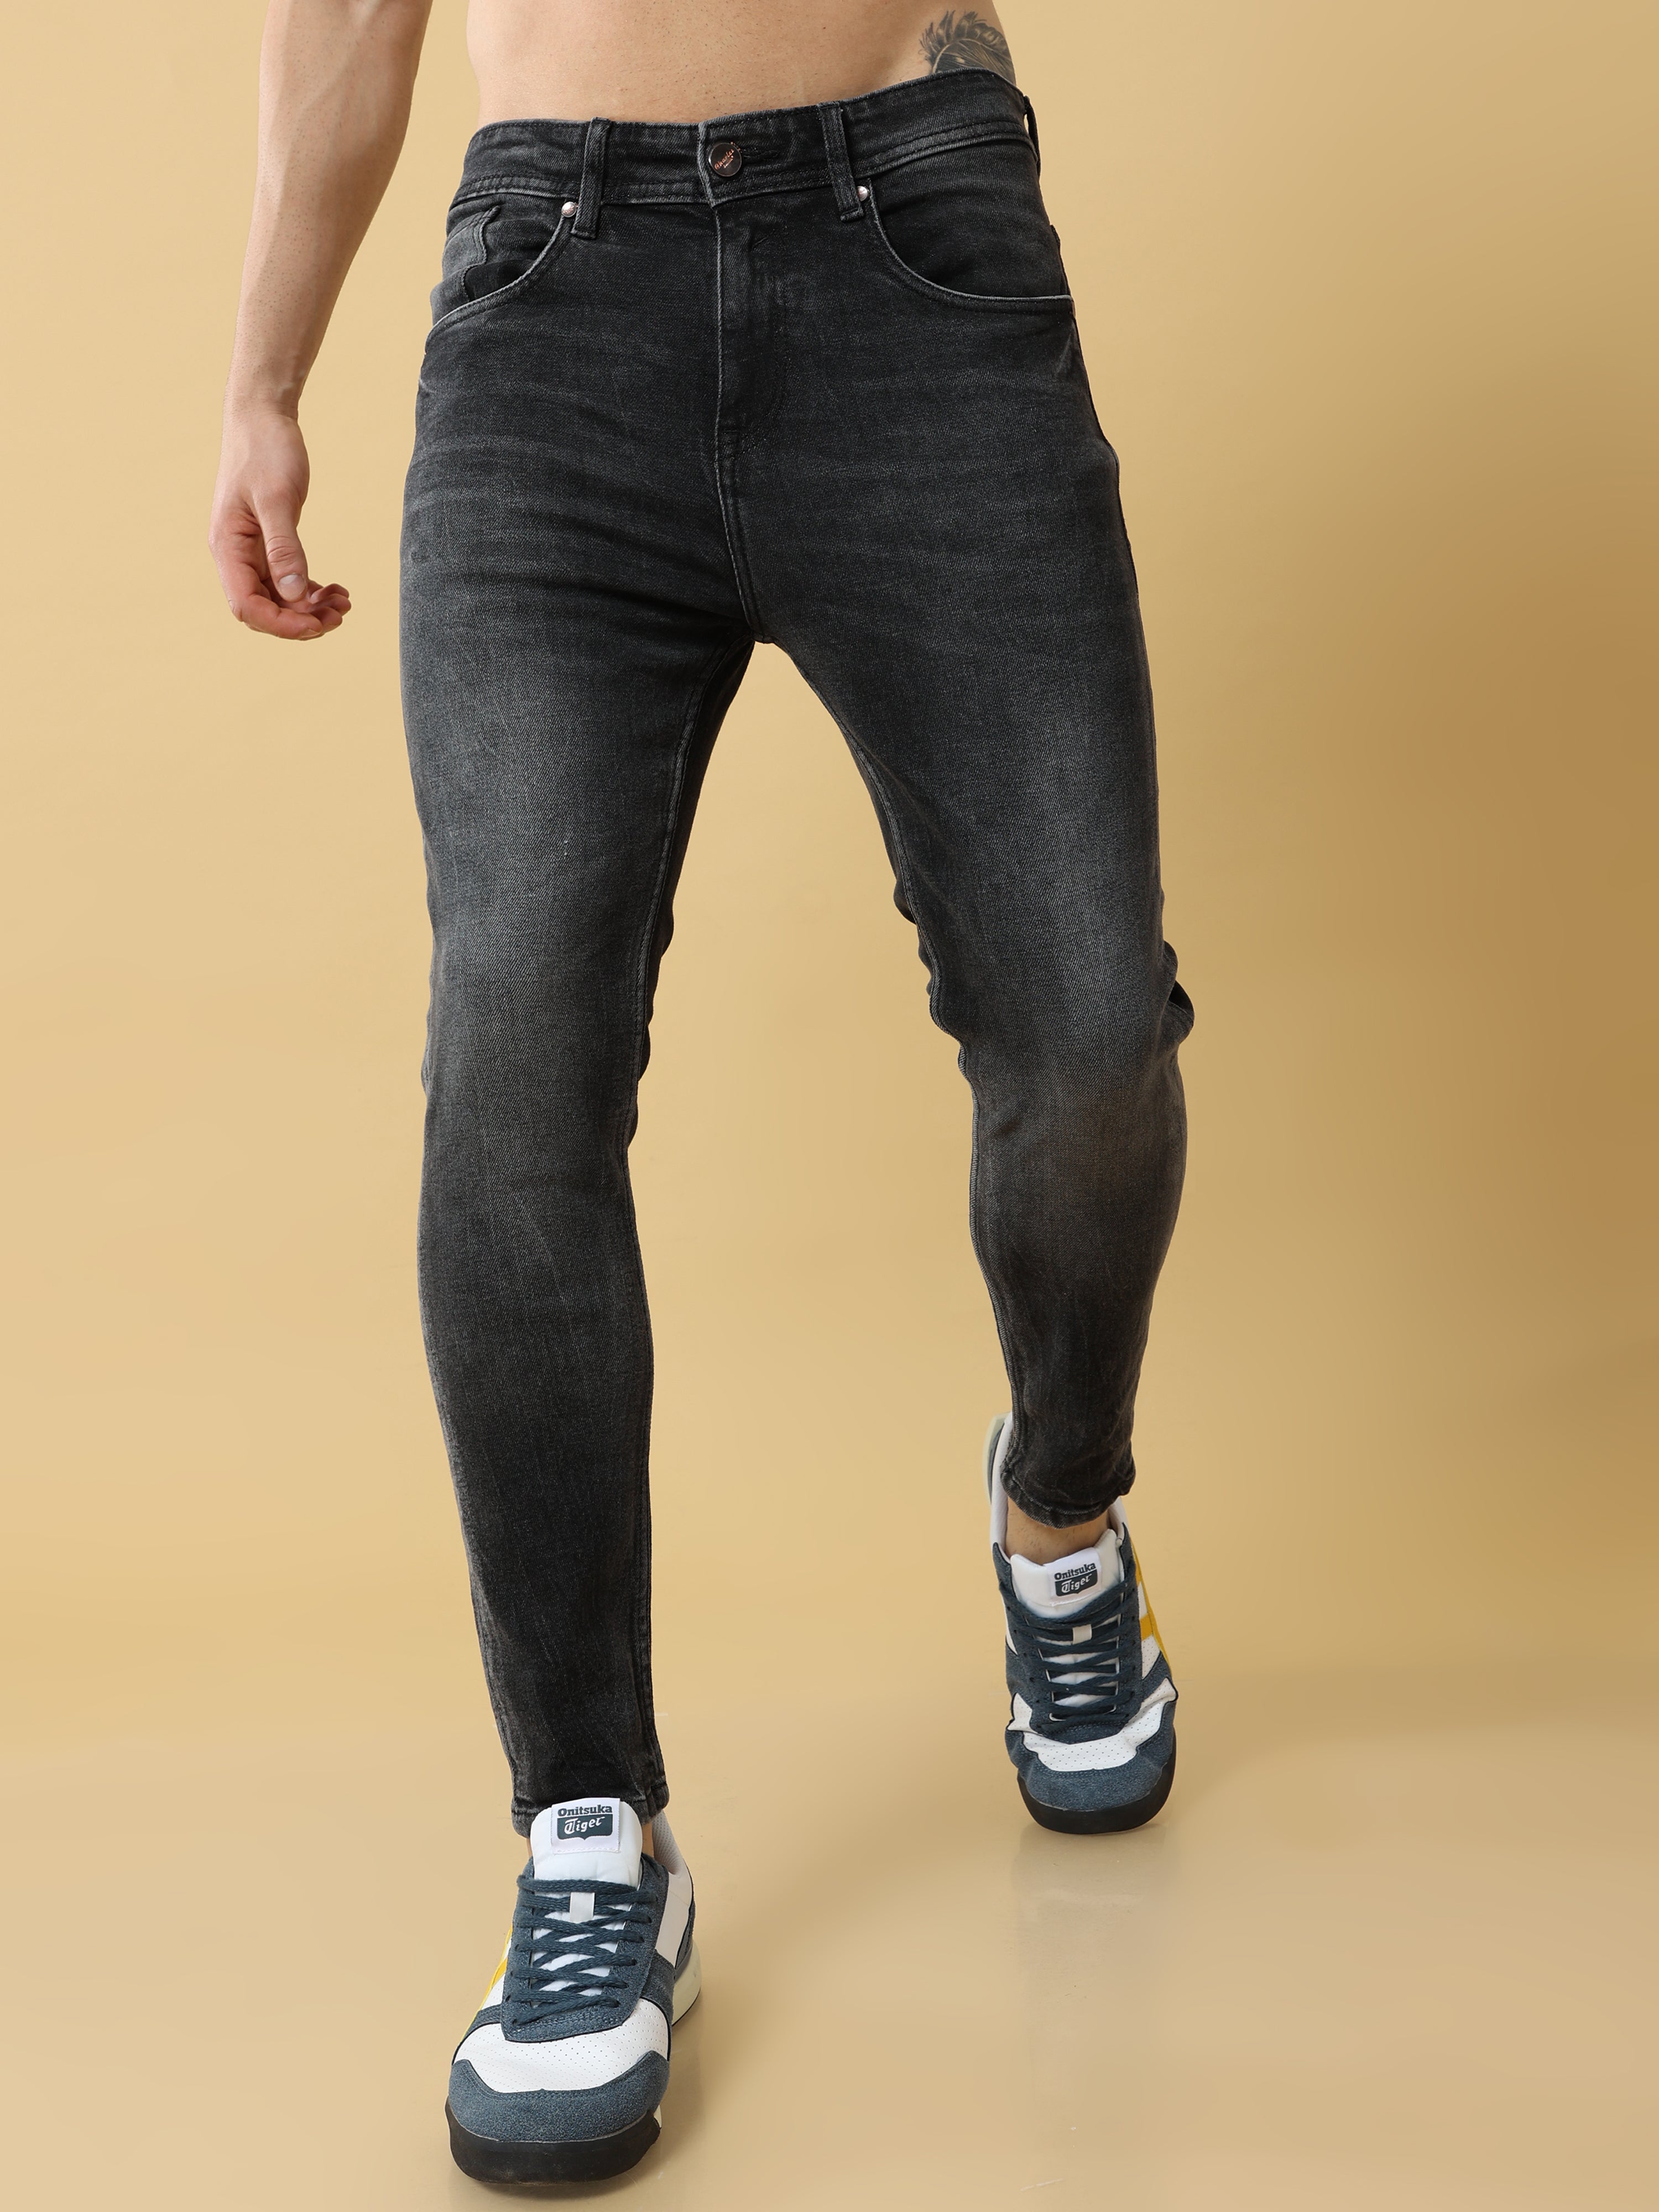 Rugged Denim Jeans/Full Outfit/Sweater Tops in Nairobi Central - Clothing,  Stylish Sisters | Jiji.co.ke